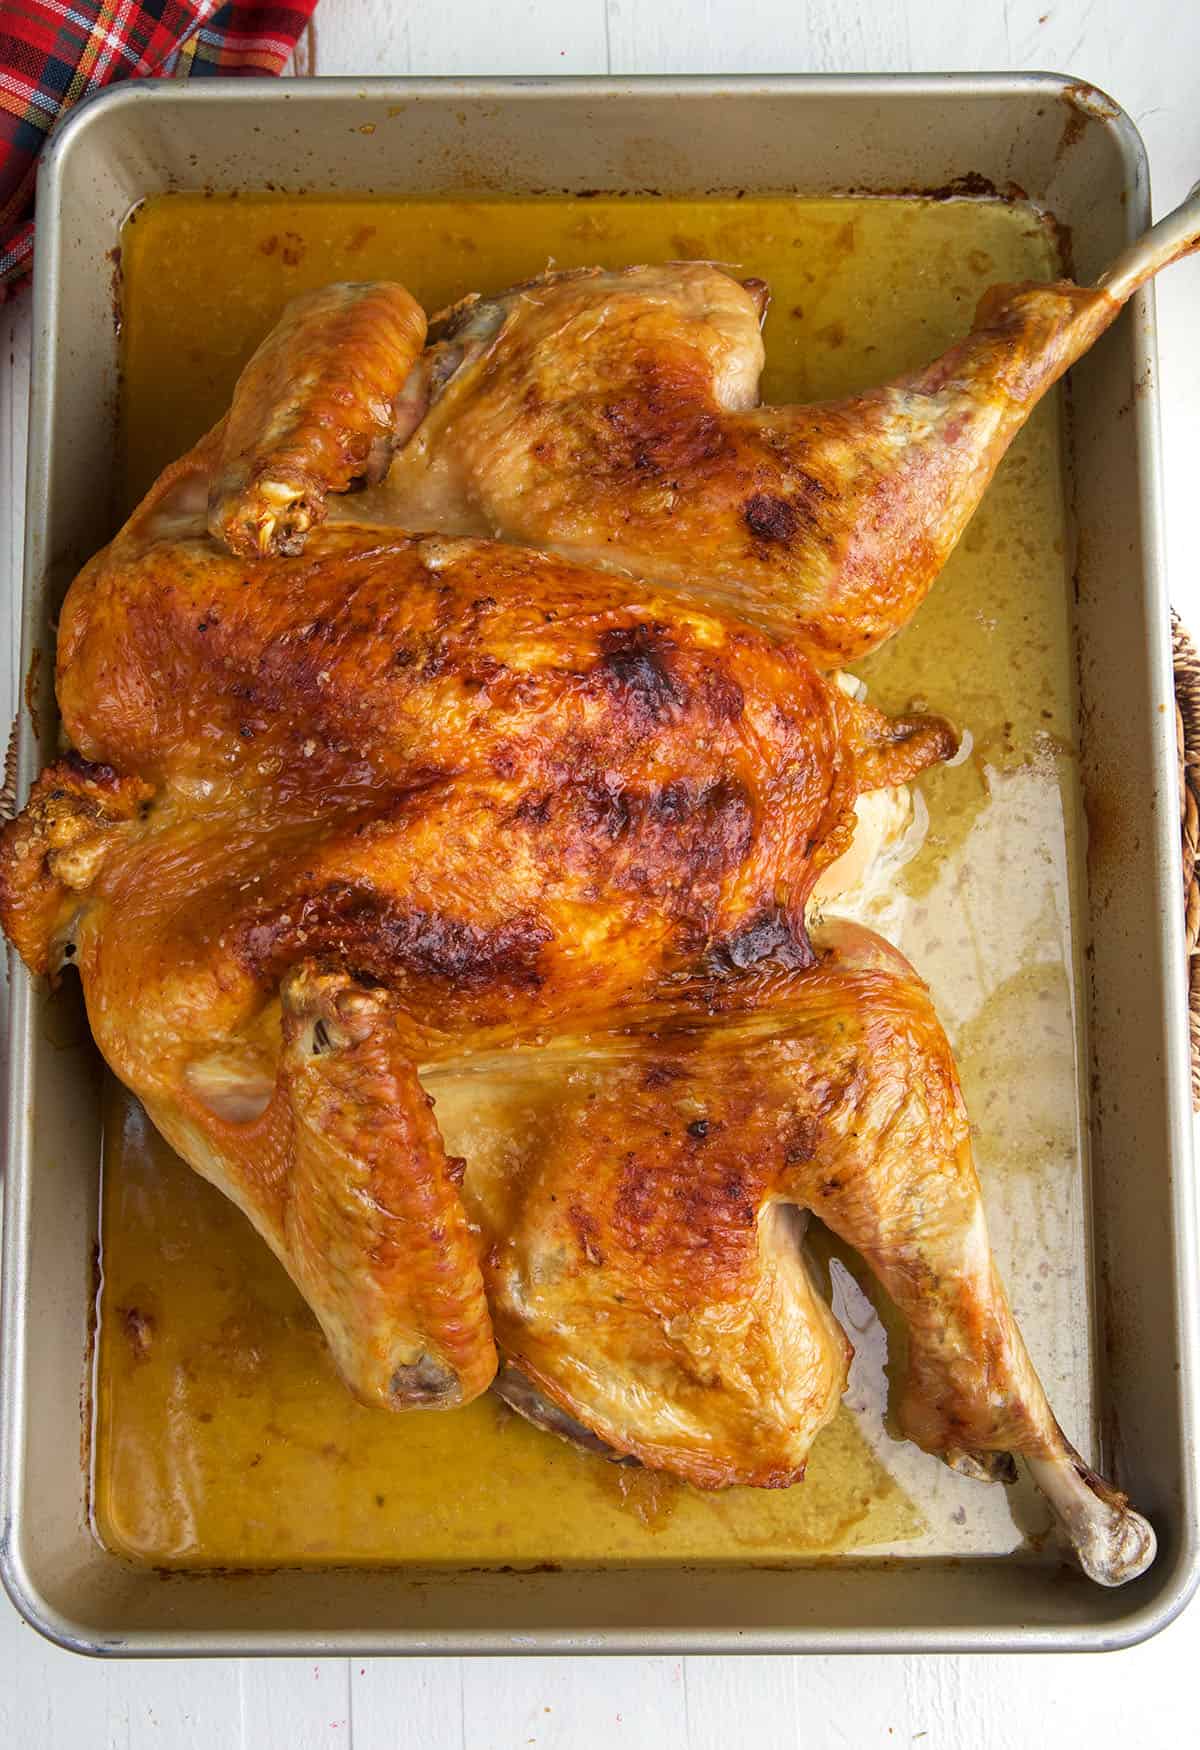 A spatchcock turkey is presented on a roasting pan.